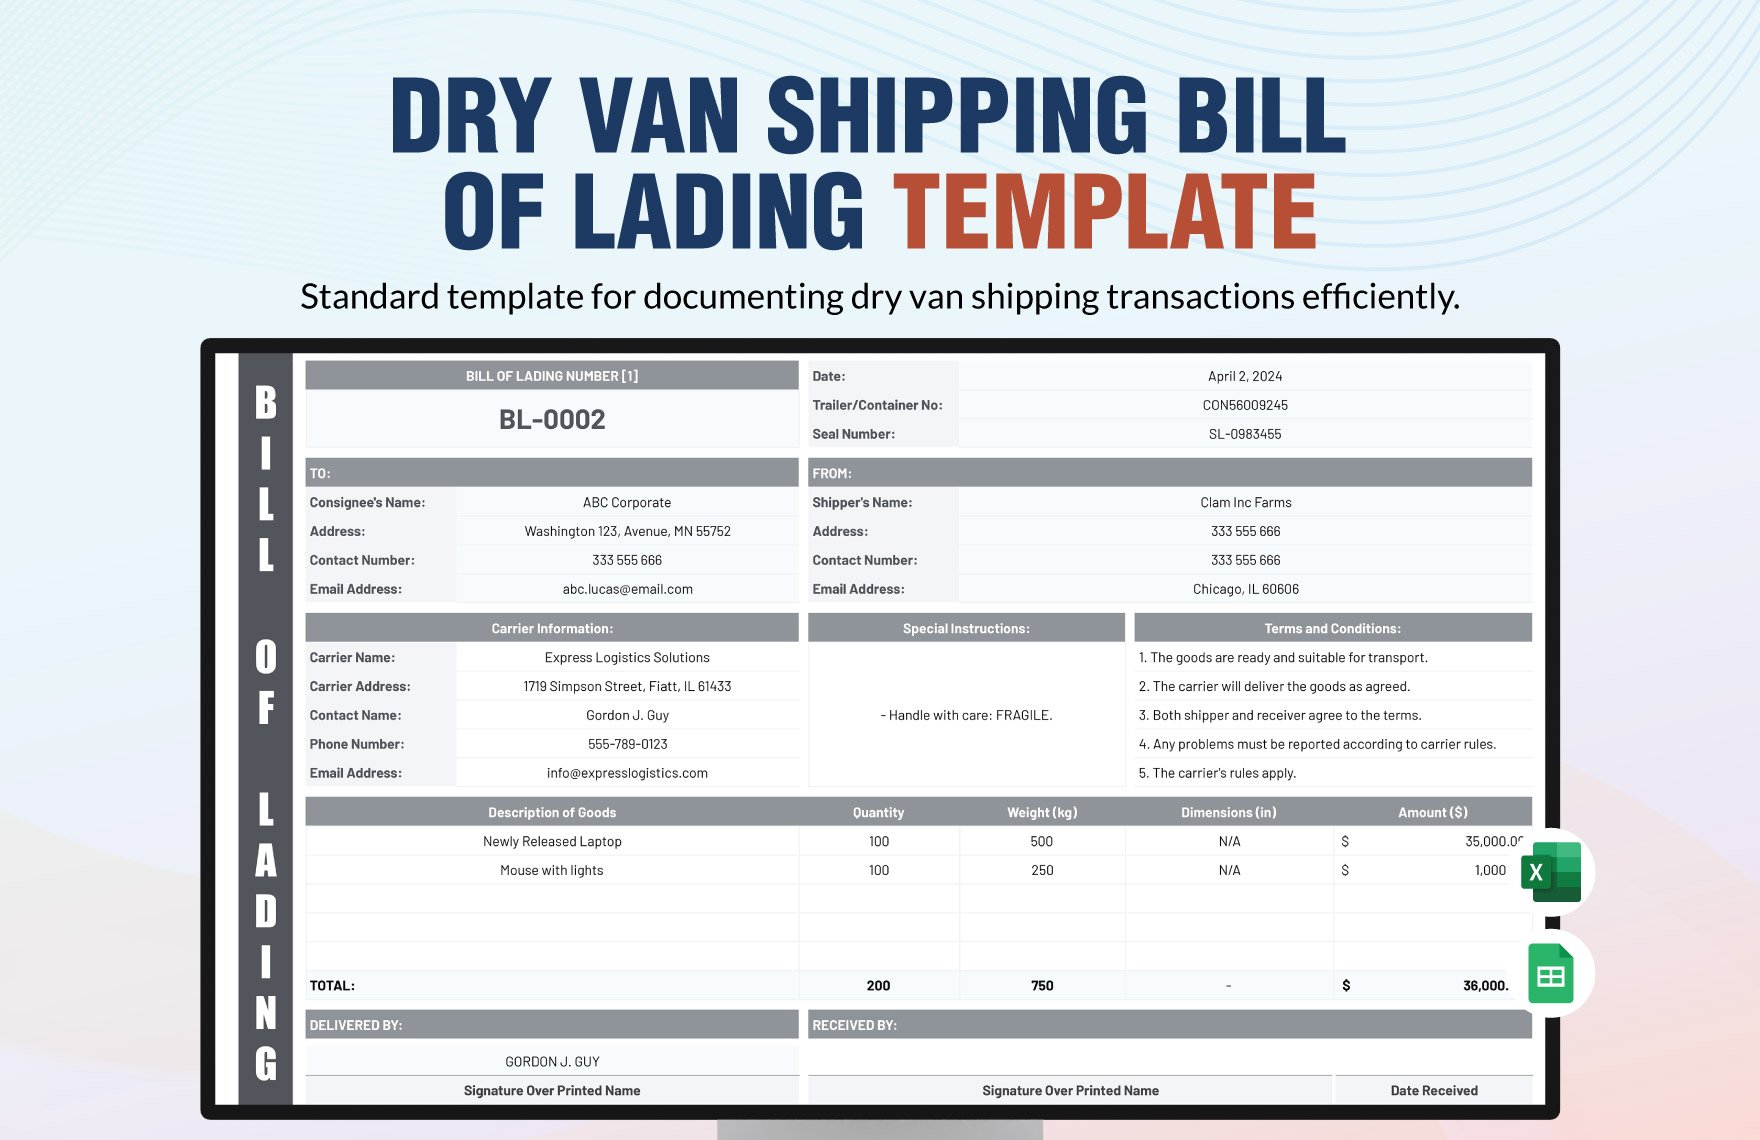 Dry Van Shipping Bill of Lading Template